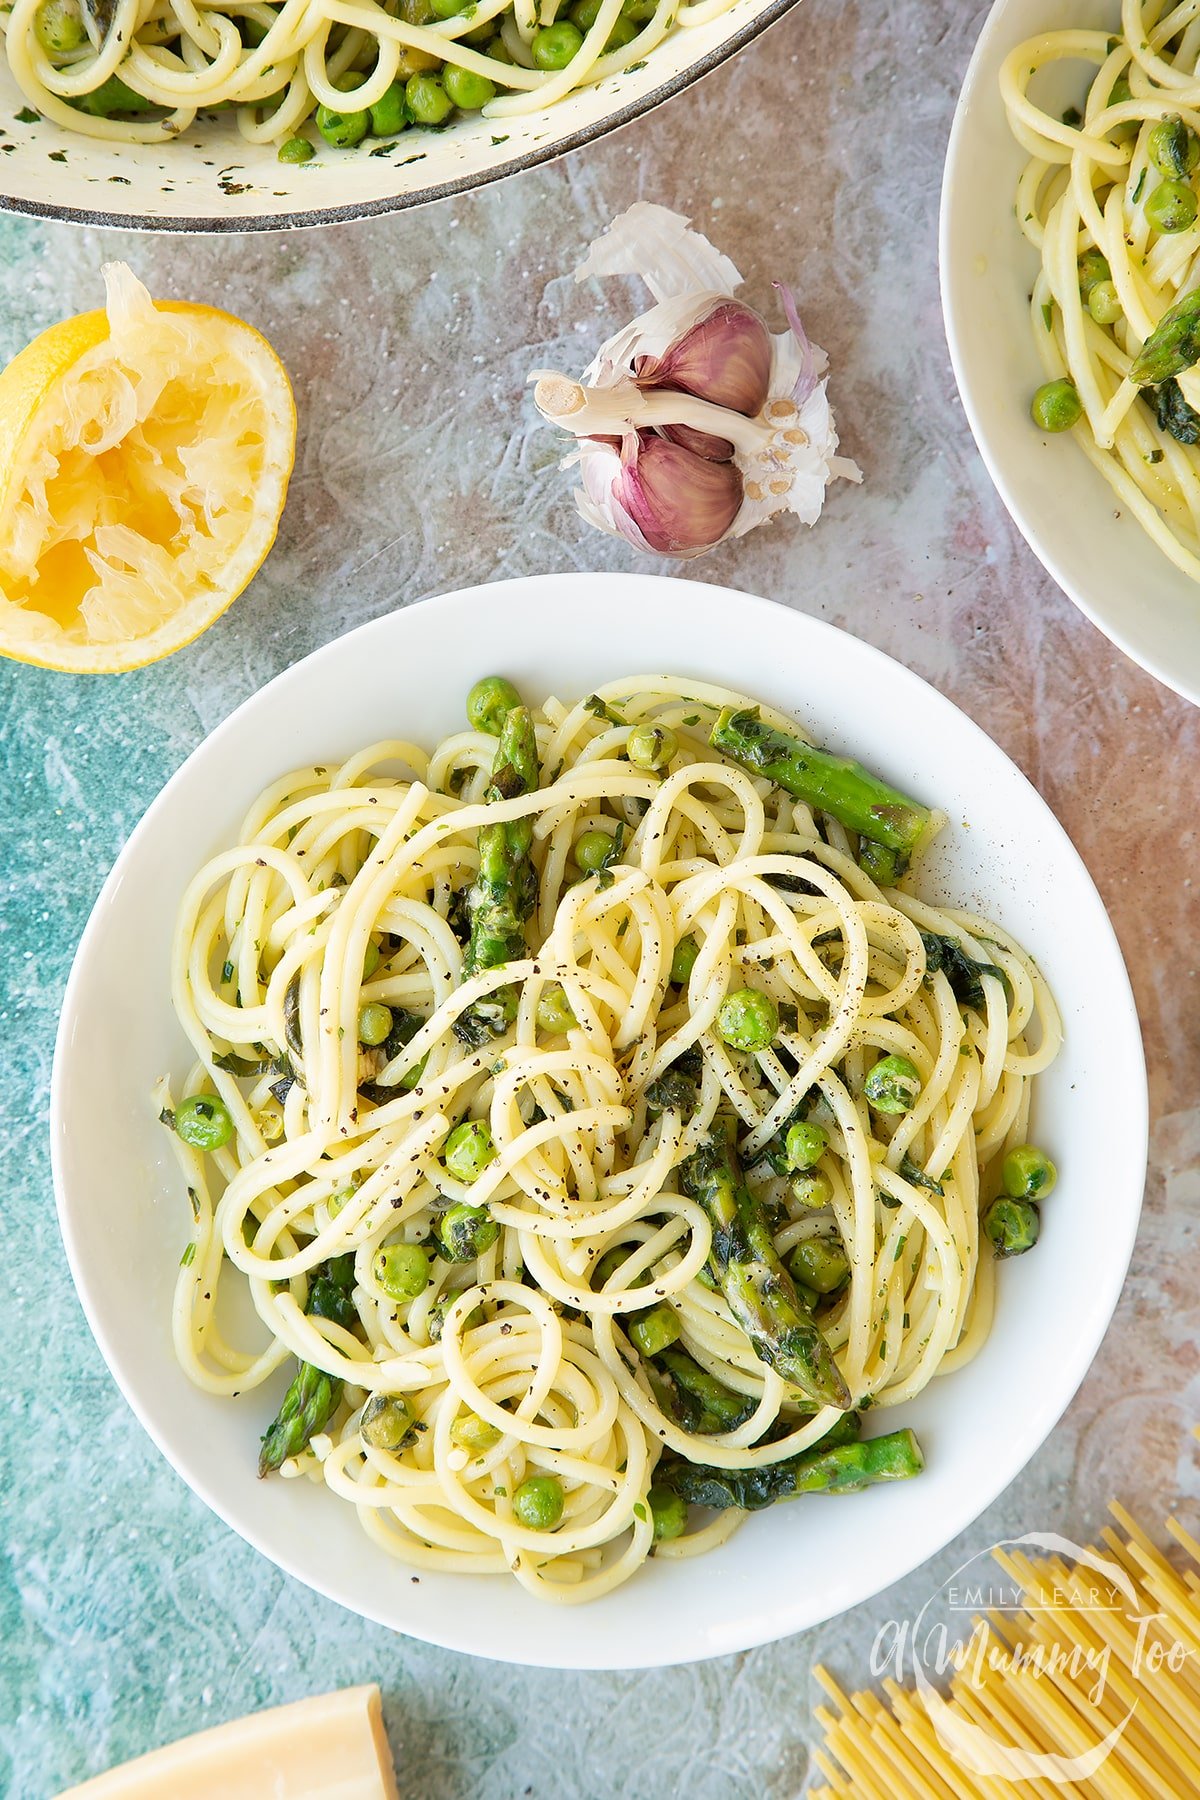 Summer spaghetti with spinach, basil, asparagus and peas, served in a white bowl. Shown from above.